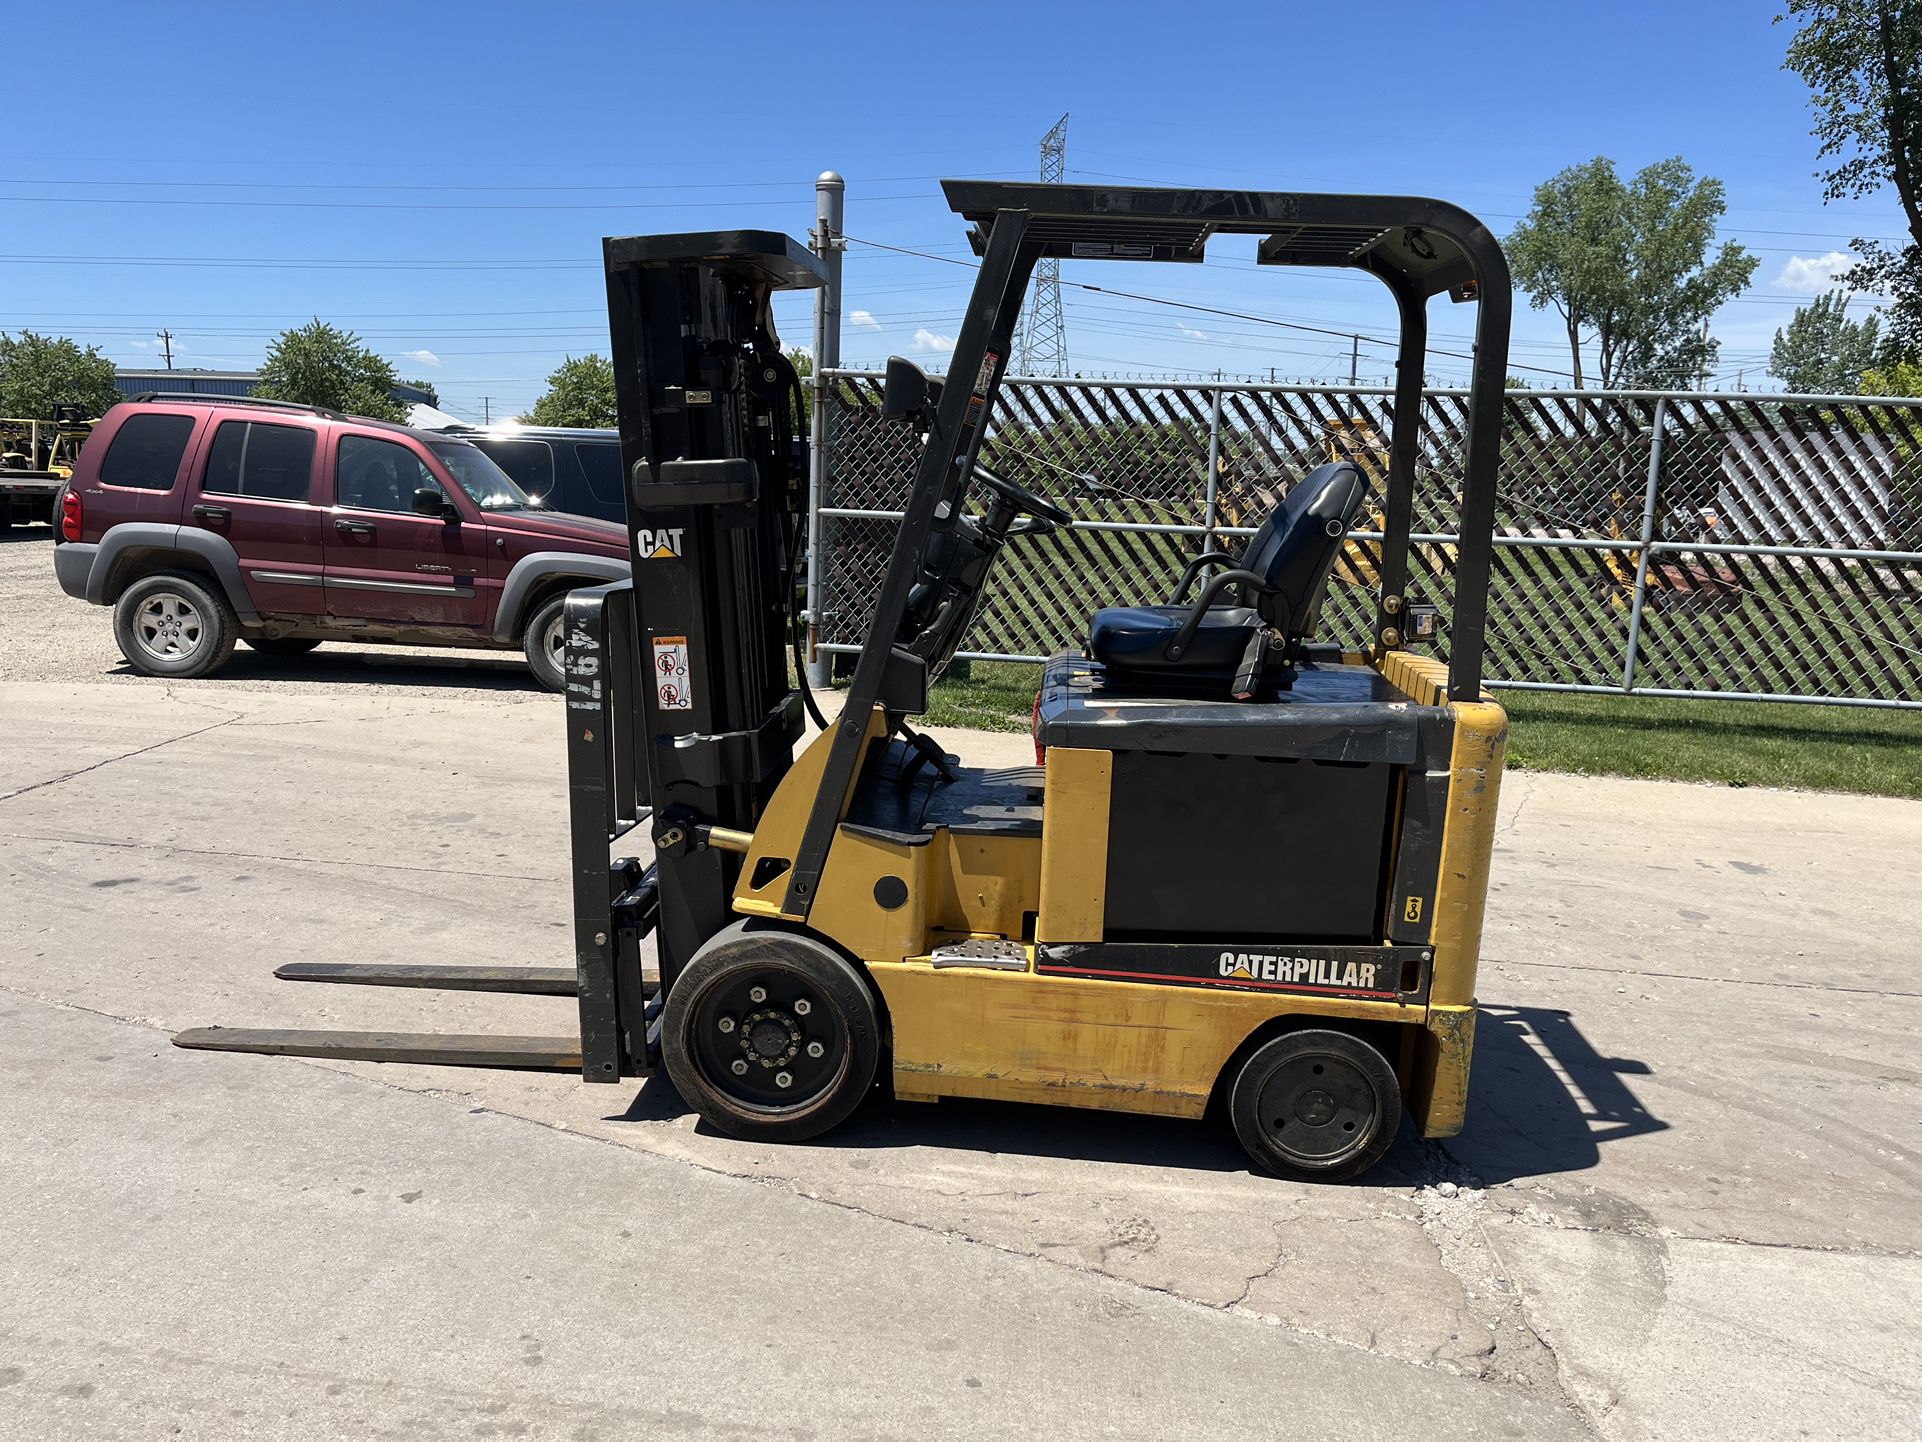 For sale a cat E5000 Forklift. 83/188 F/F tsu mast, sideshift,p/s,36v battery, 6806 drive hours,42 inch forks. It is in good working condition.